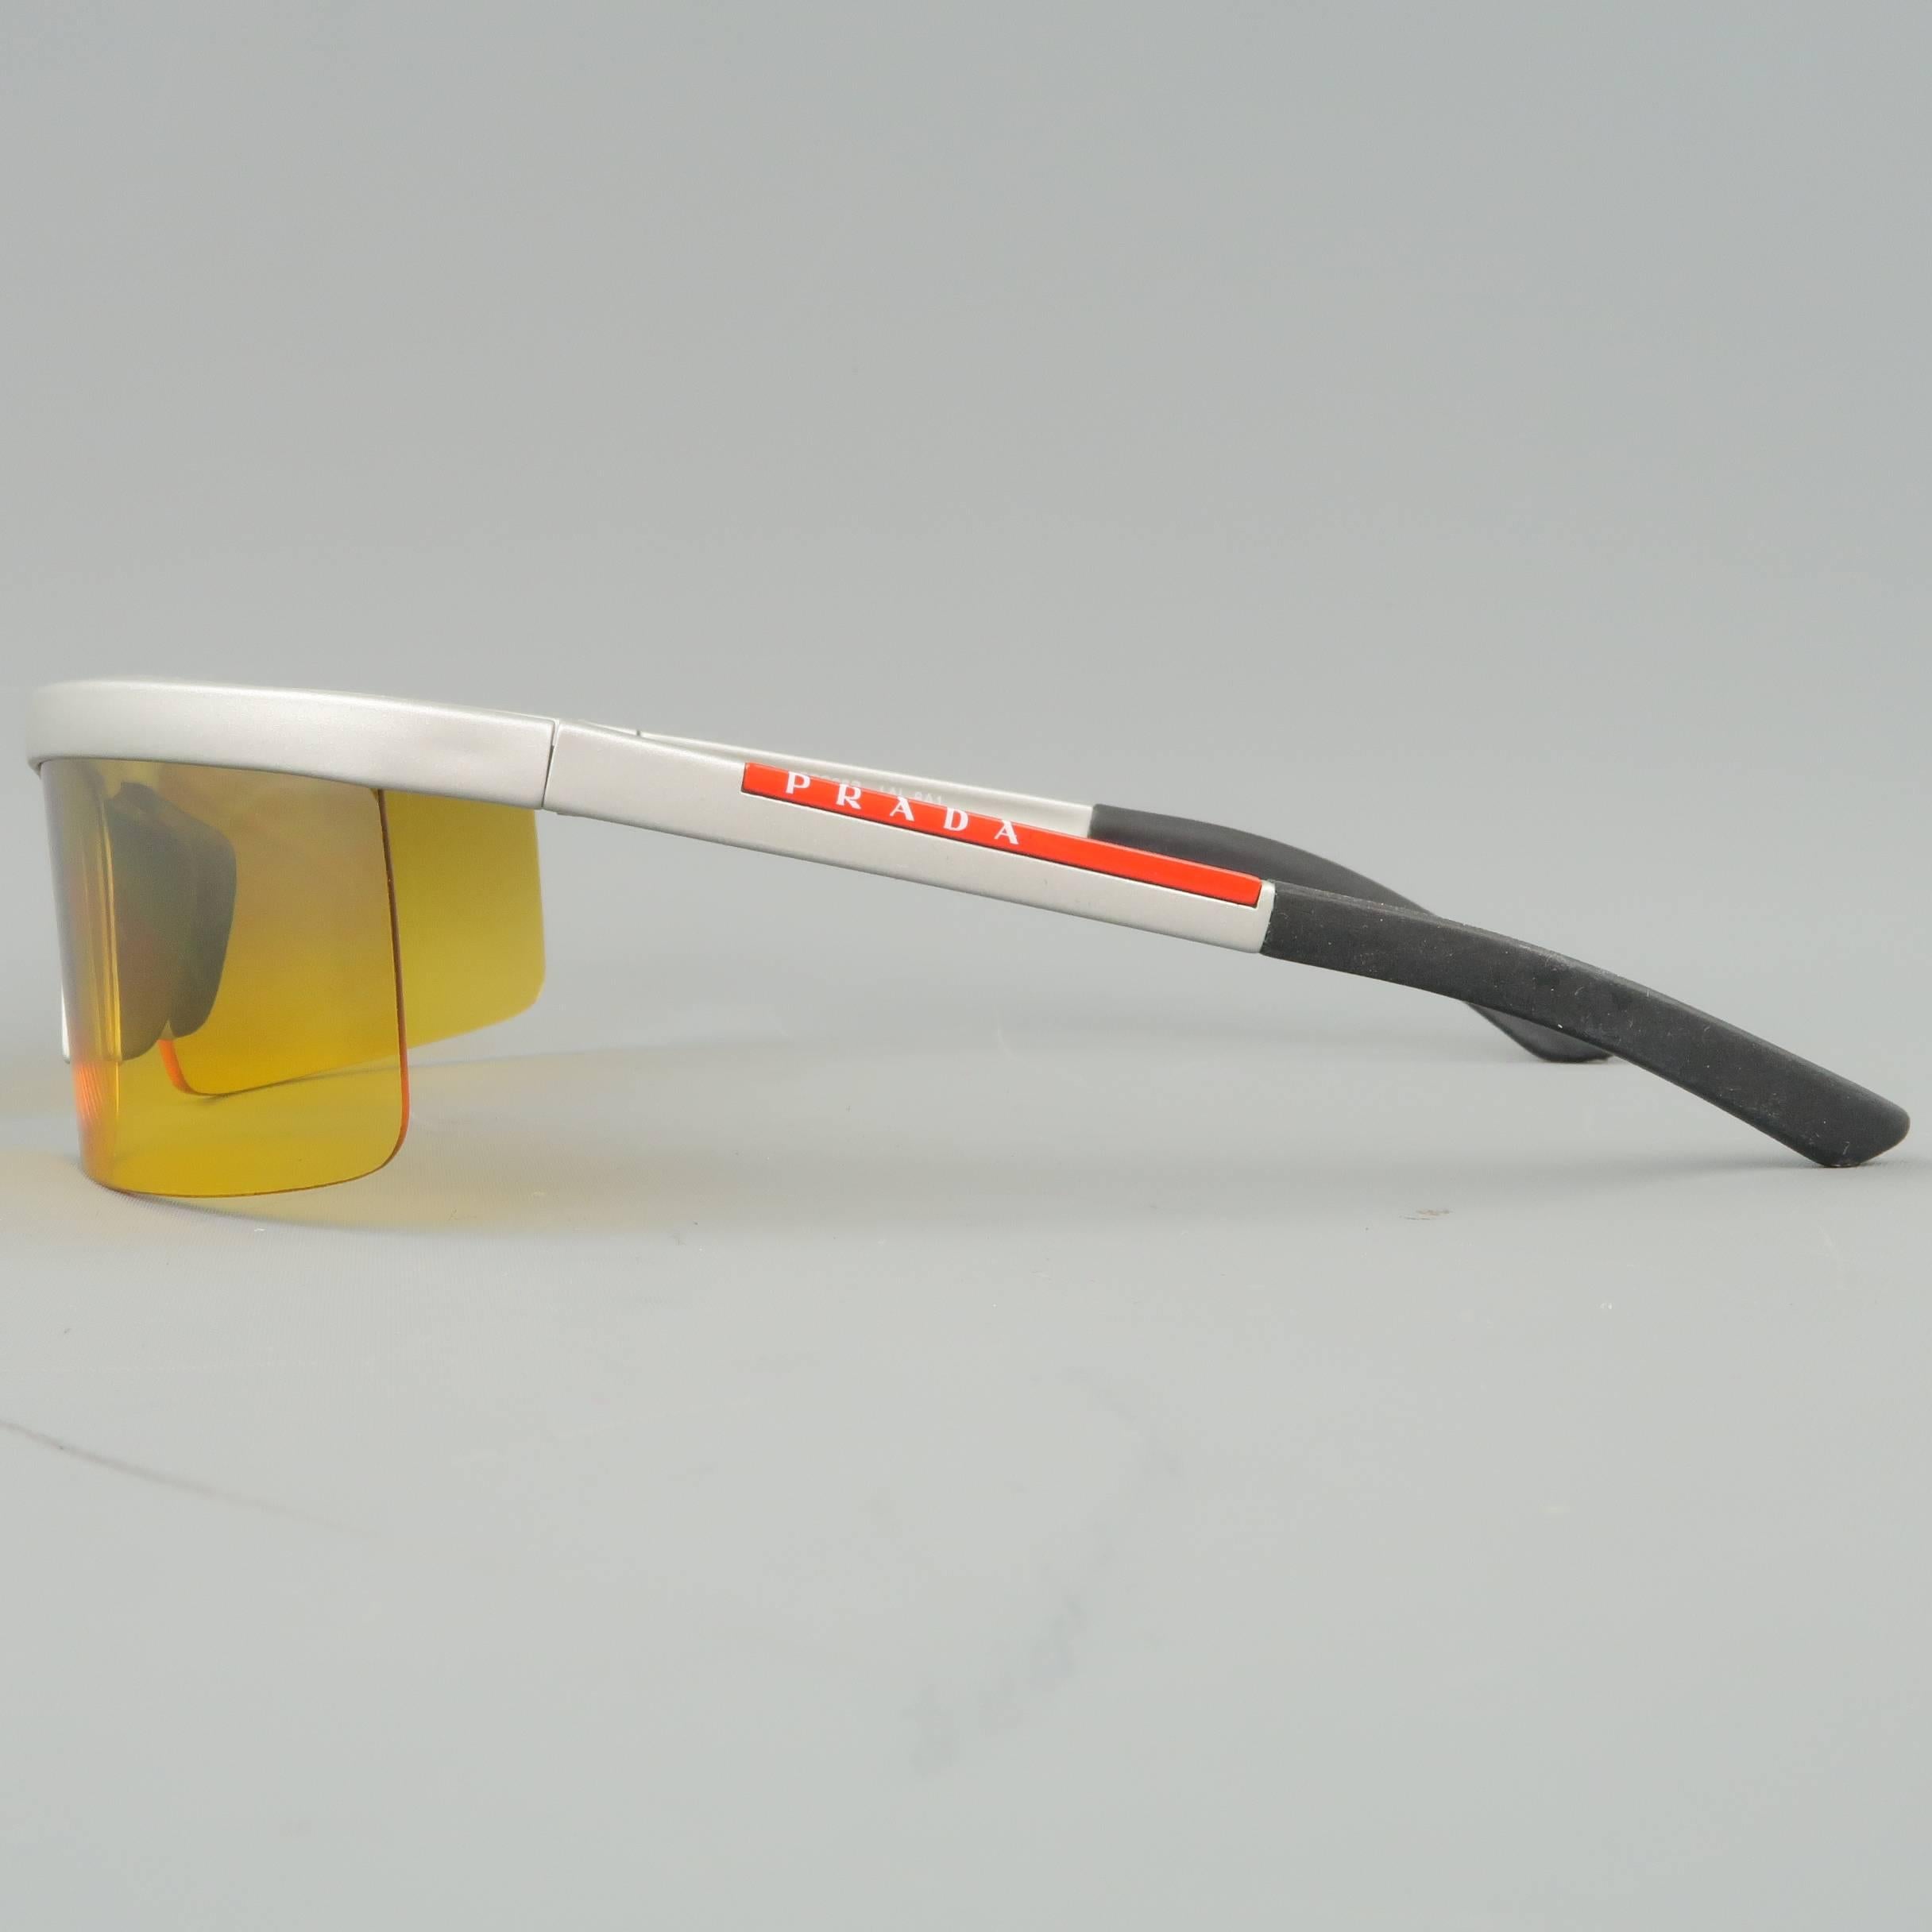 PRADA sport sunglasses come in a matte metallic silver acetate with red logo on arm and yellow square lenses. With case. Made in Italy.
 
Good Pre-Owned Condition.
Marked: SPS05B 1AL-8A1
 
Measurements:
 
Length: 14 cm.
Height: 4.10 cm